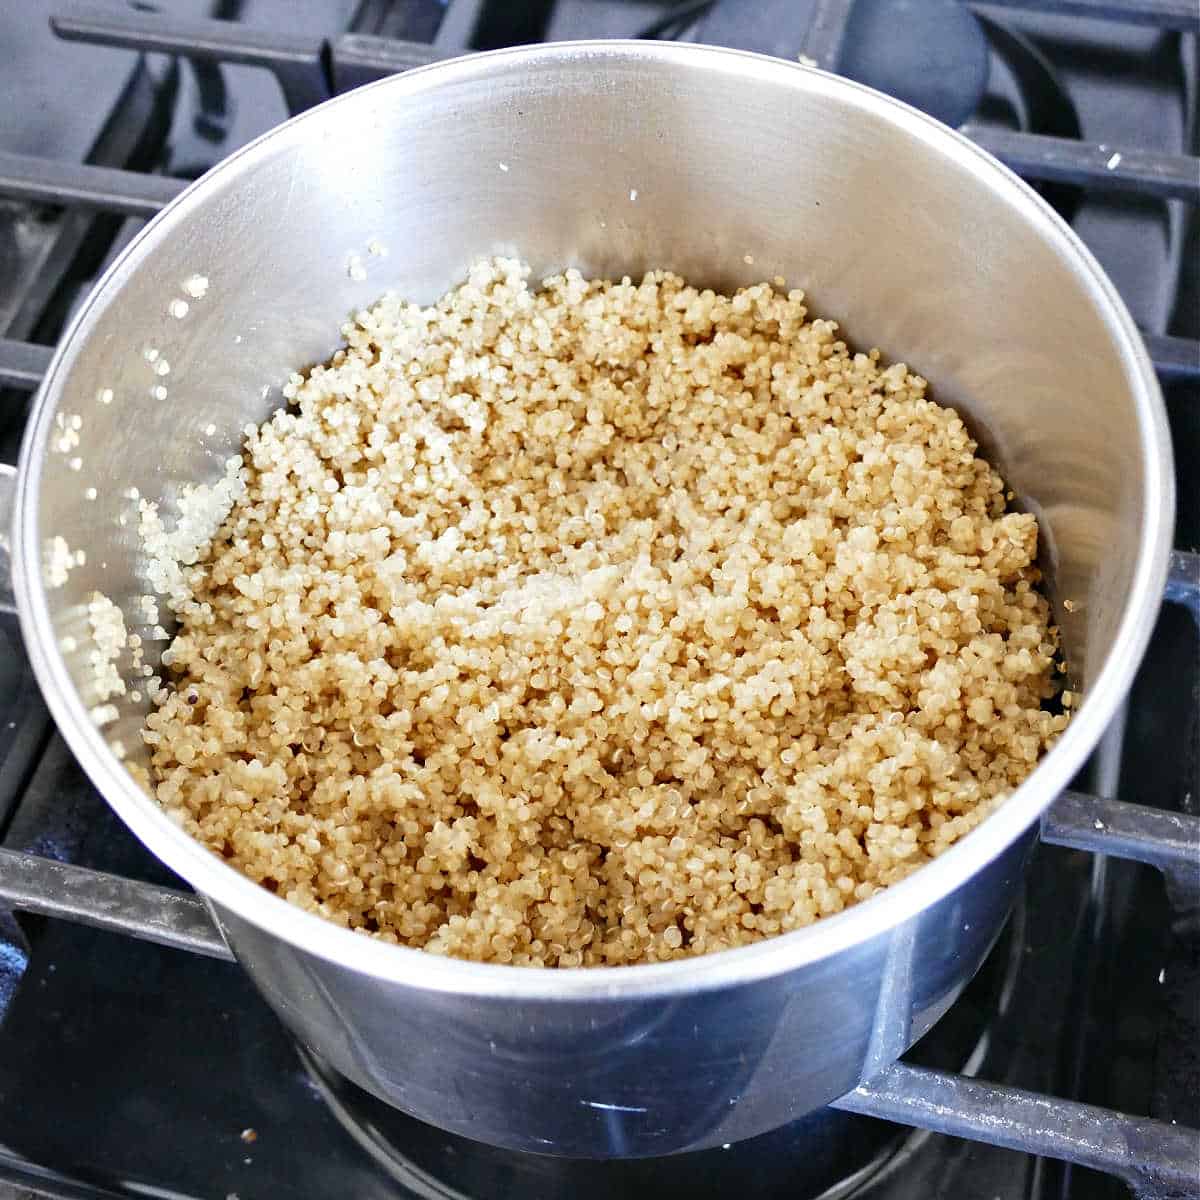 Cooking quinoa in a large pot on the stove.